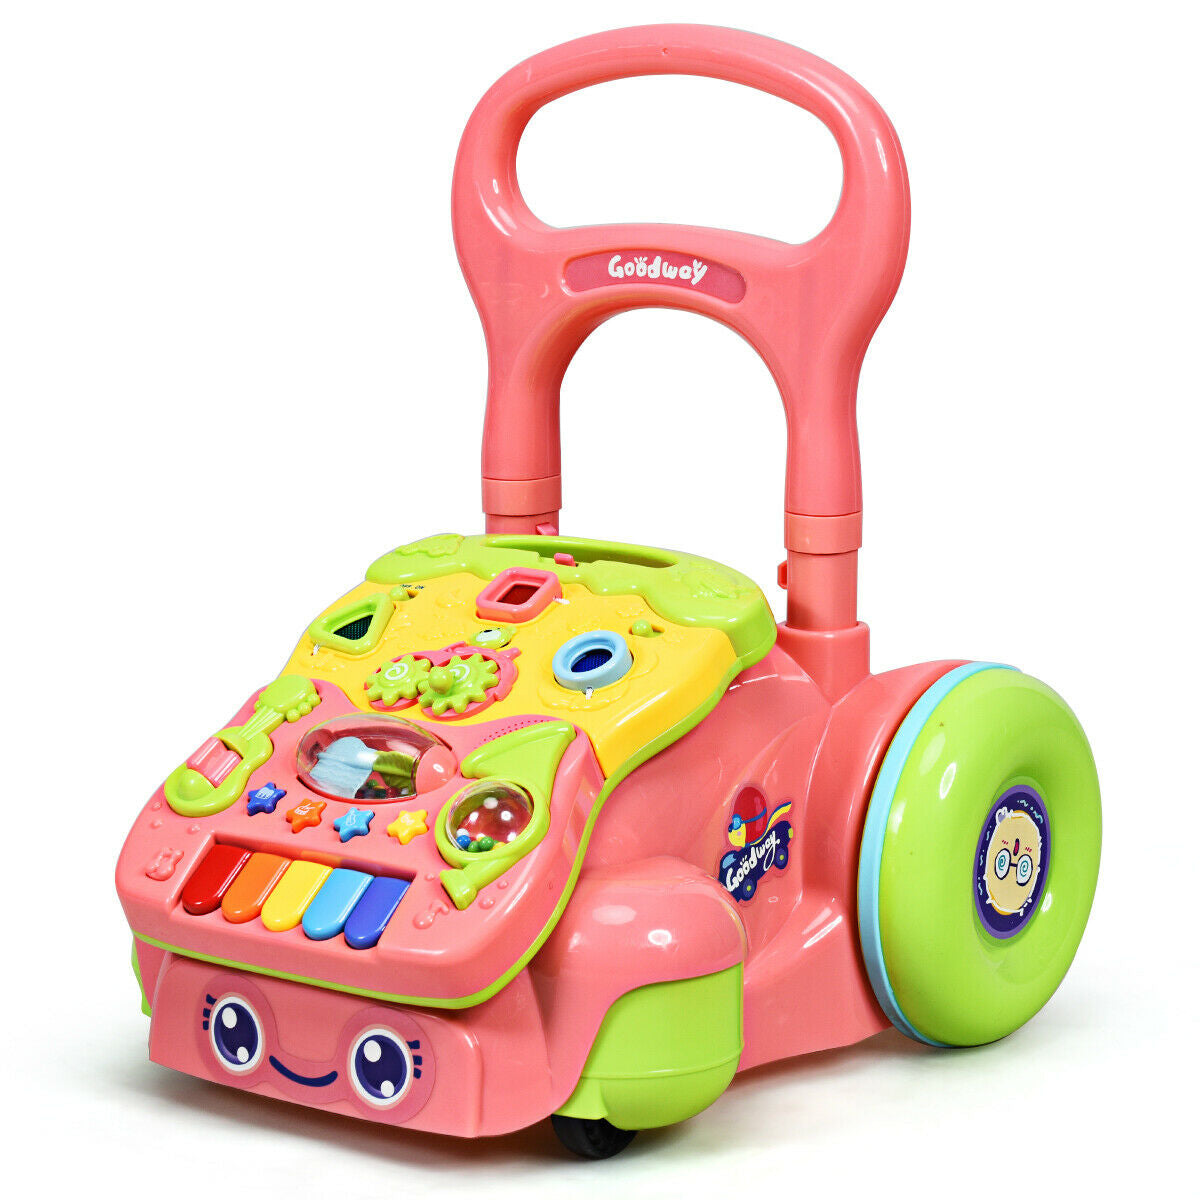 Sit-to-Stand Learning Baby Walker for Early Development Toys